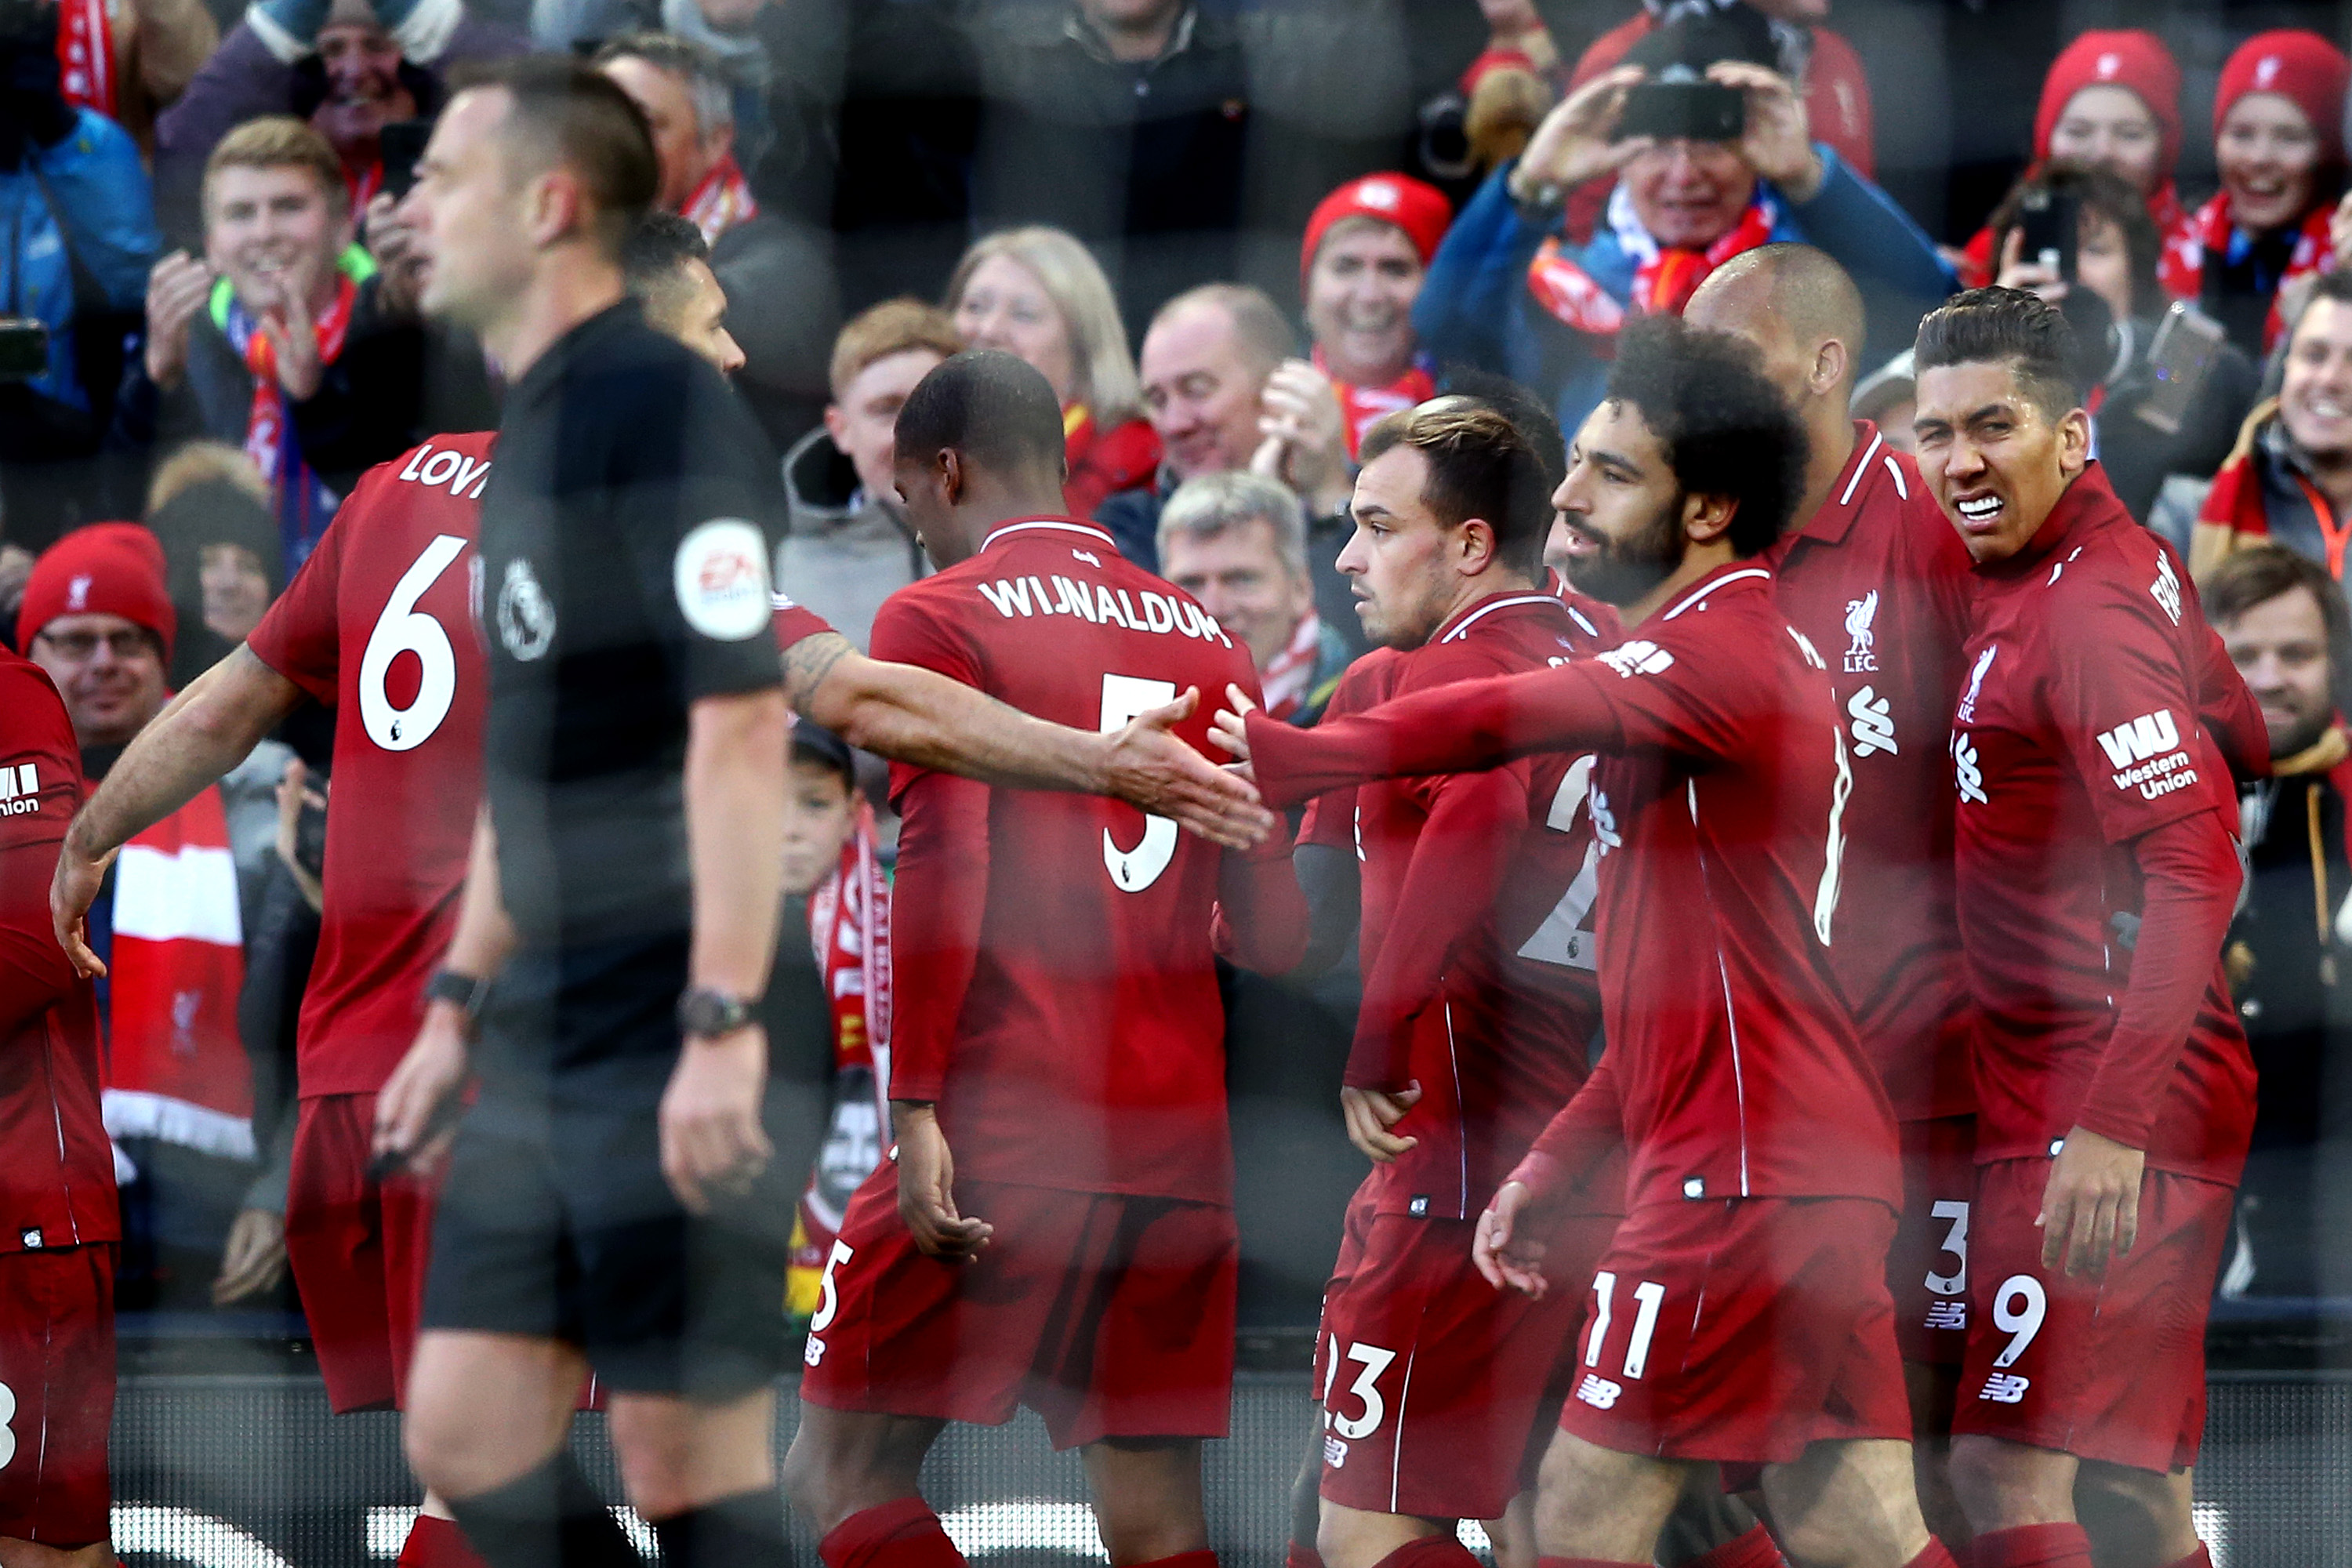 LIVERPOOL, ENGLAND - OCTOBER 27:  Sadio Mane of Liverpool celebrates with teammates after scoring his team's second goal during the Premier League match between Liverpool FC and Cardiff City at Anfield on October 27, 2018 in Liverpool, United Kingdom.  (Photo by Jan Kruger/Getty Images)